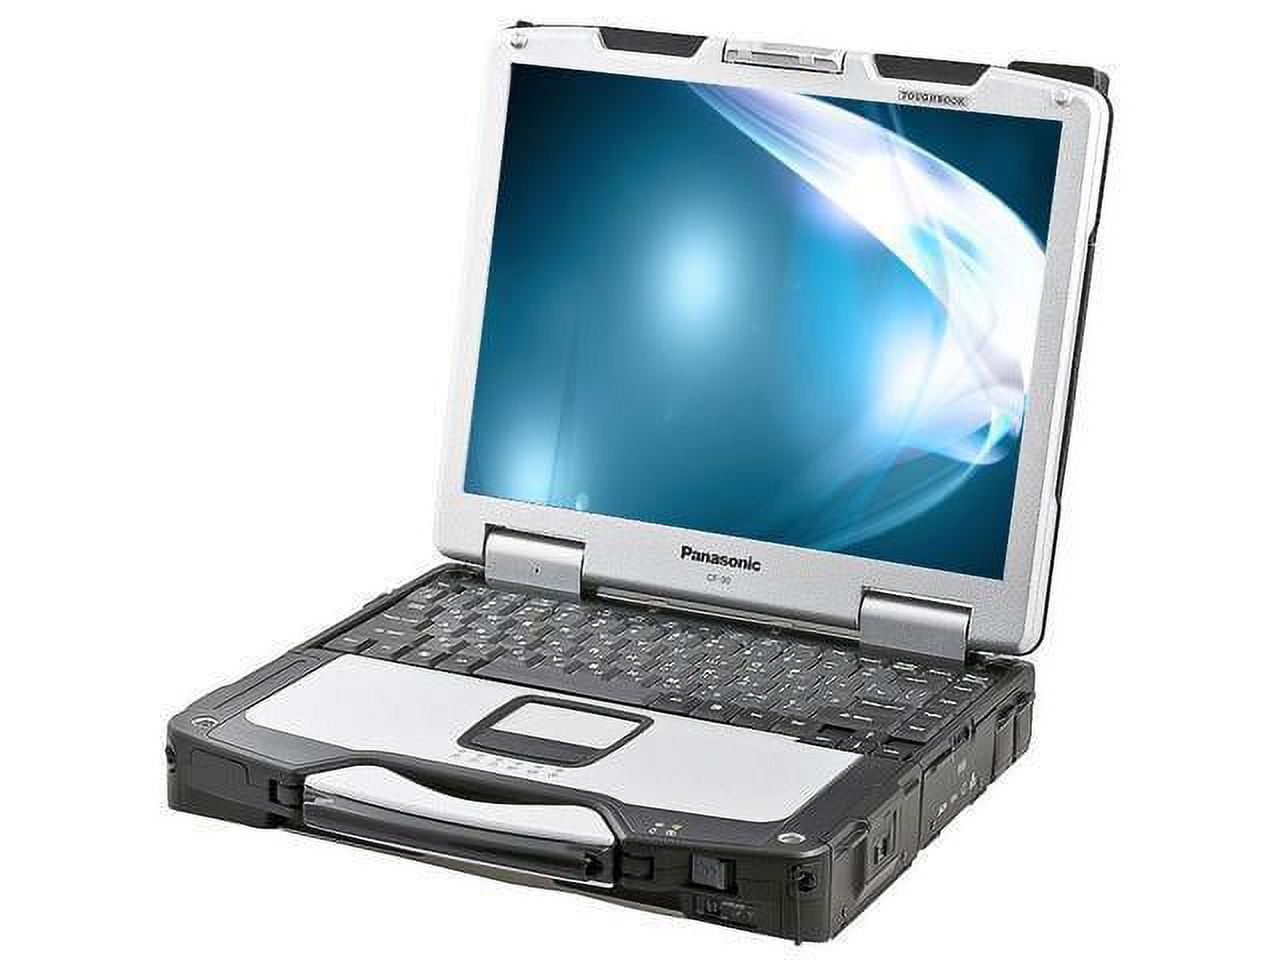 Panasonic Toughbook CF-52NKE102M 15.4" Notebook - Intel Core i5 i5-540M 2.53 GHz 4 GB Ram 250 GB HDD Win 7 pro - USED with FREE 3 Year Warranty provided by CPS. - image 1 of 2